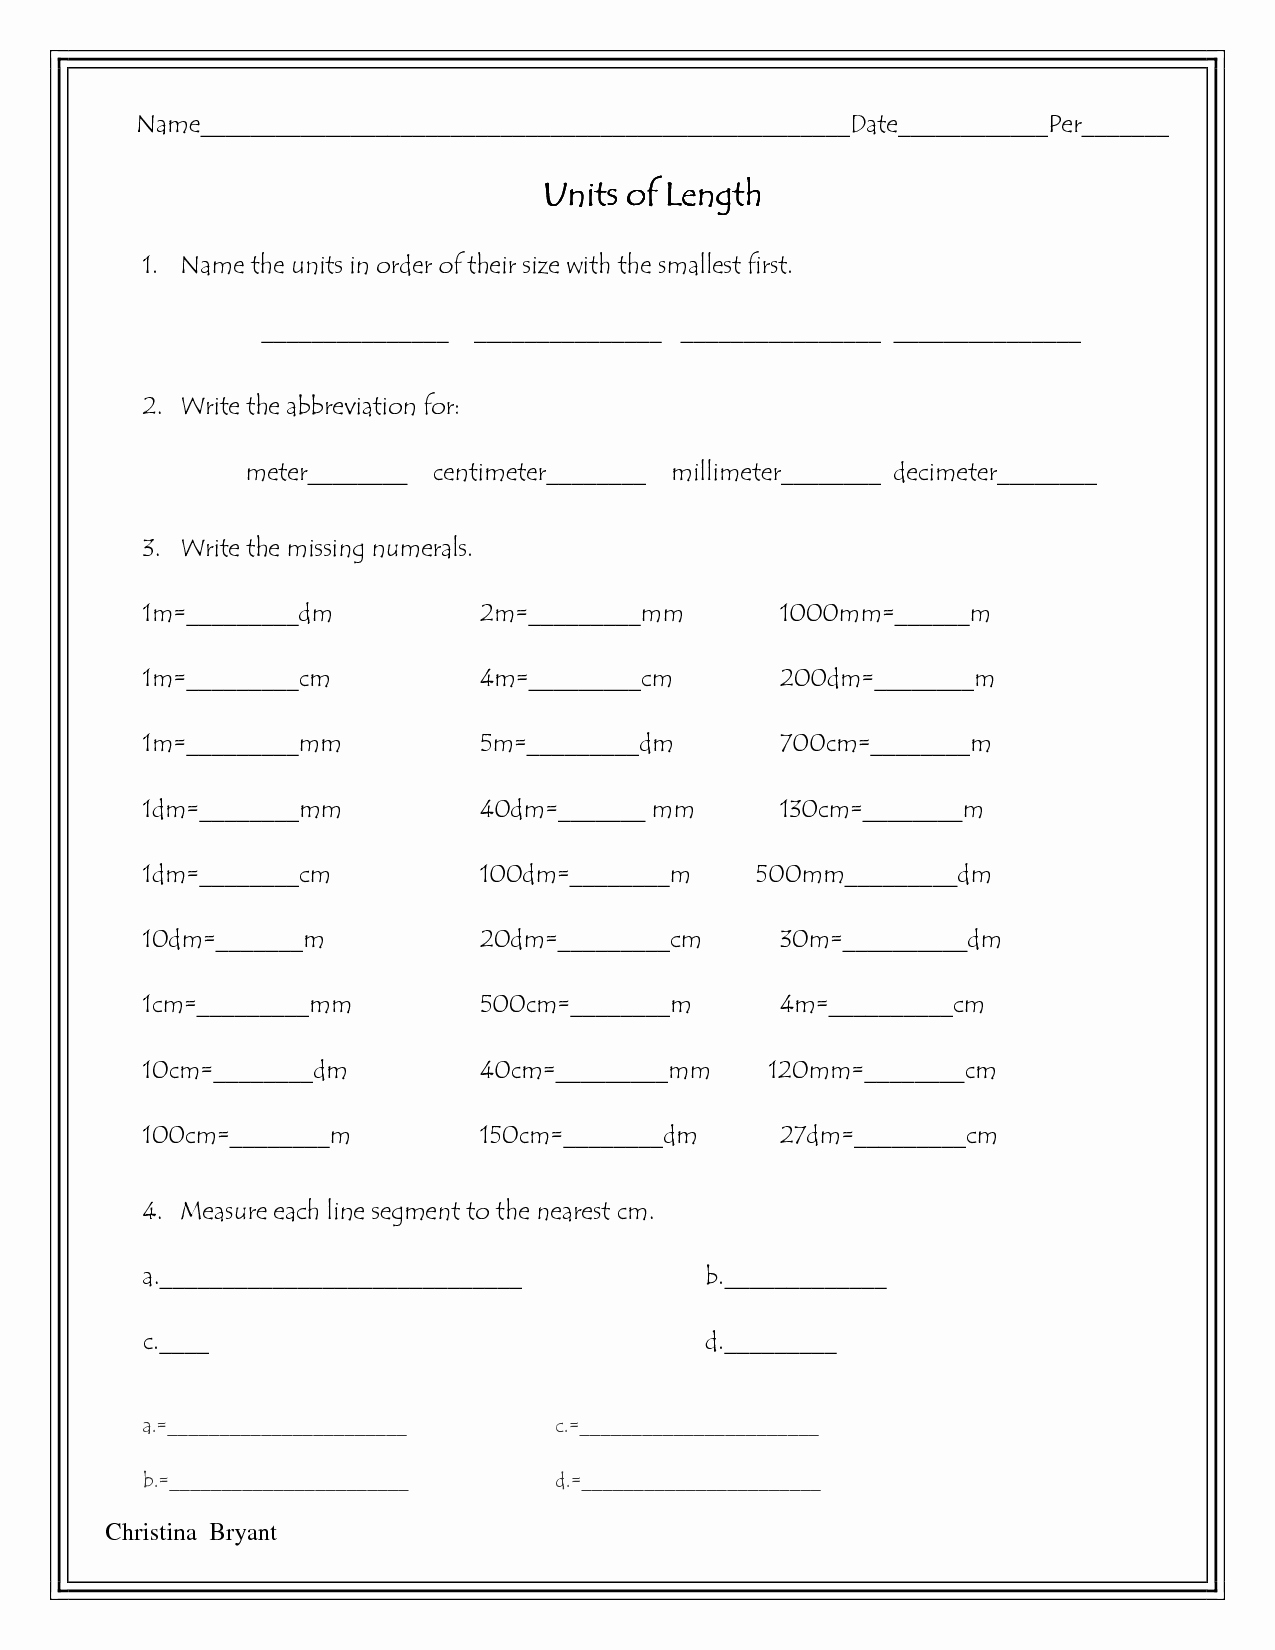 Measuring Units Worksheet Answer Key Fresh 13 Best Of Yards to Inches Worksheets Customary